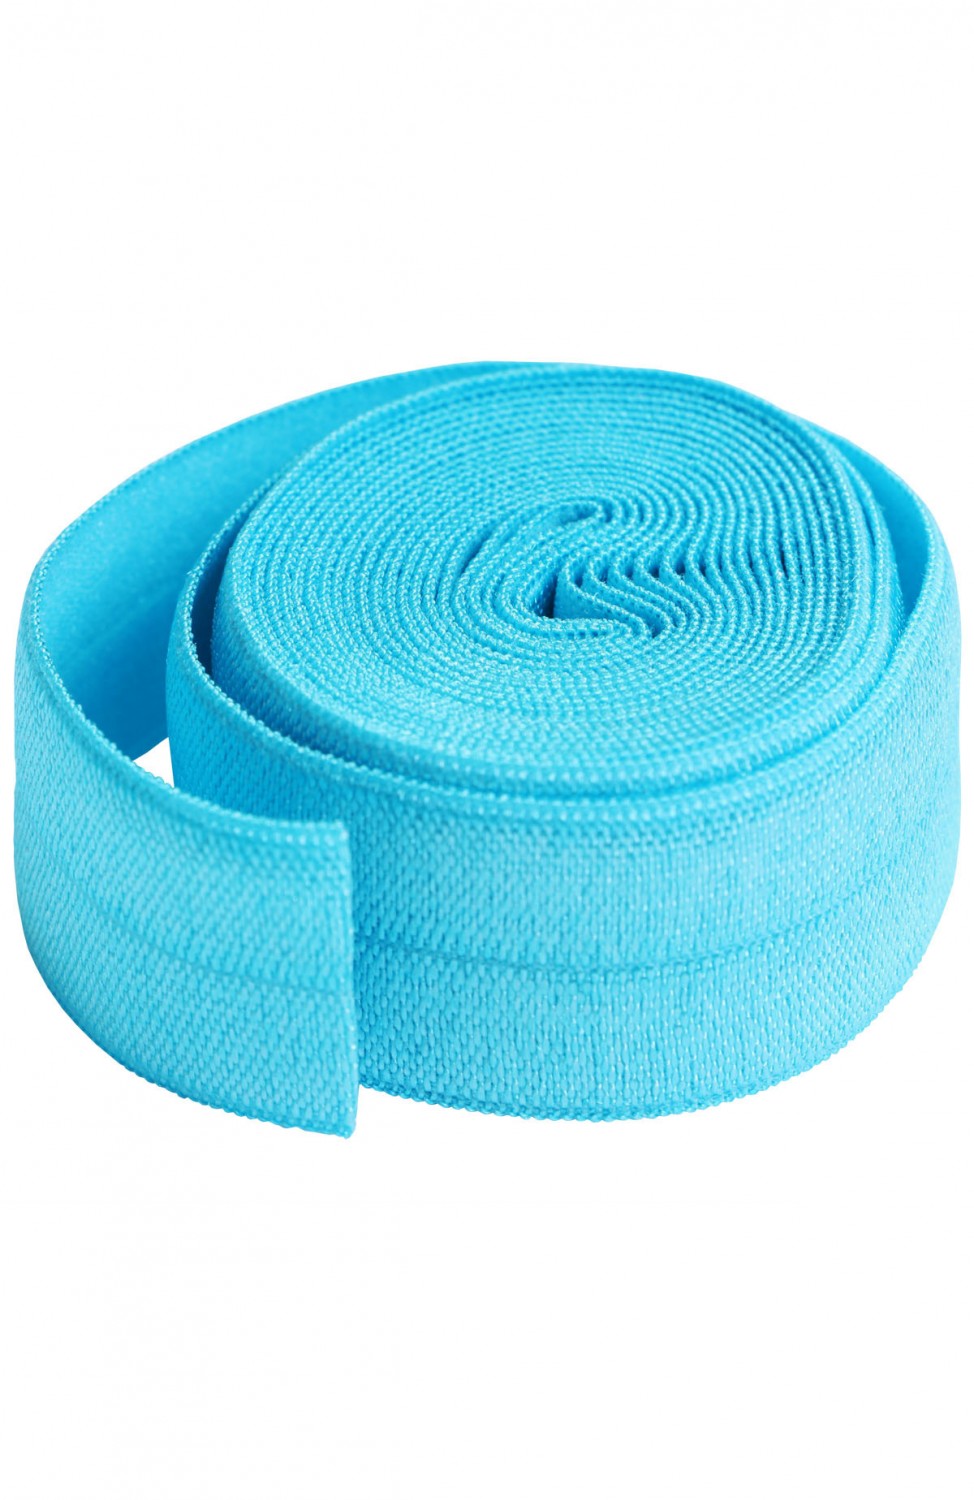 Fold-Over Elastic - Parrot Blue - 3/4" x 2YD - by Annie